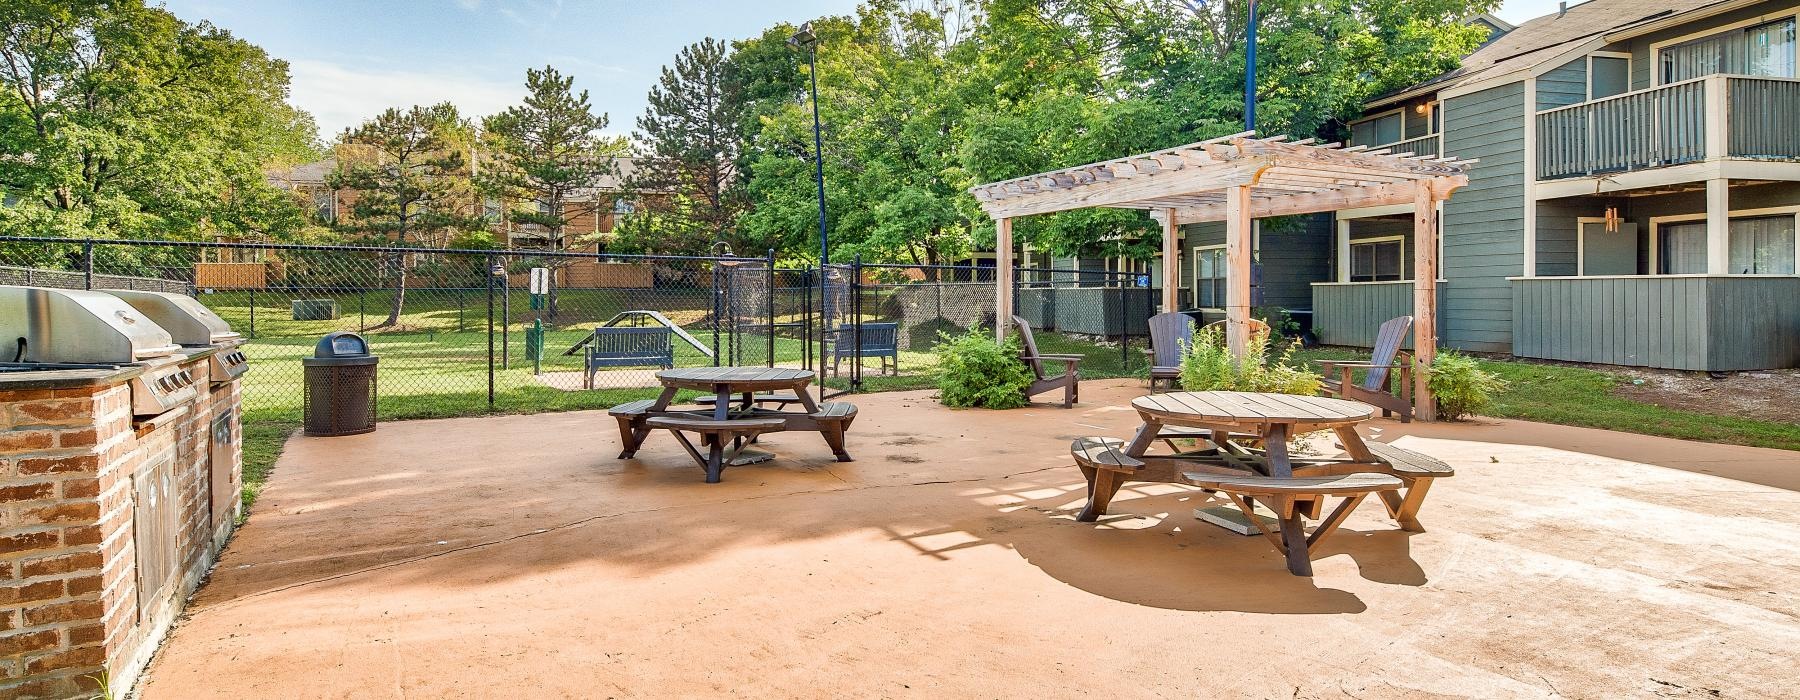 outdoor grills and picnic area